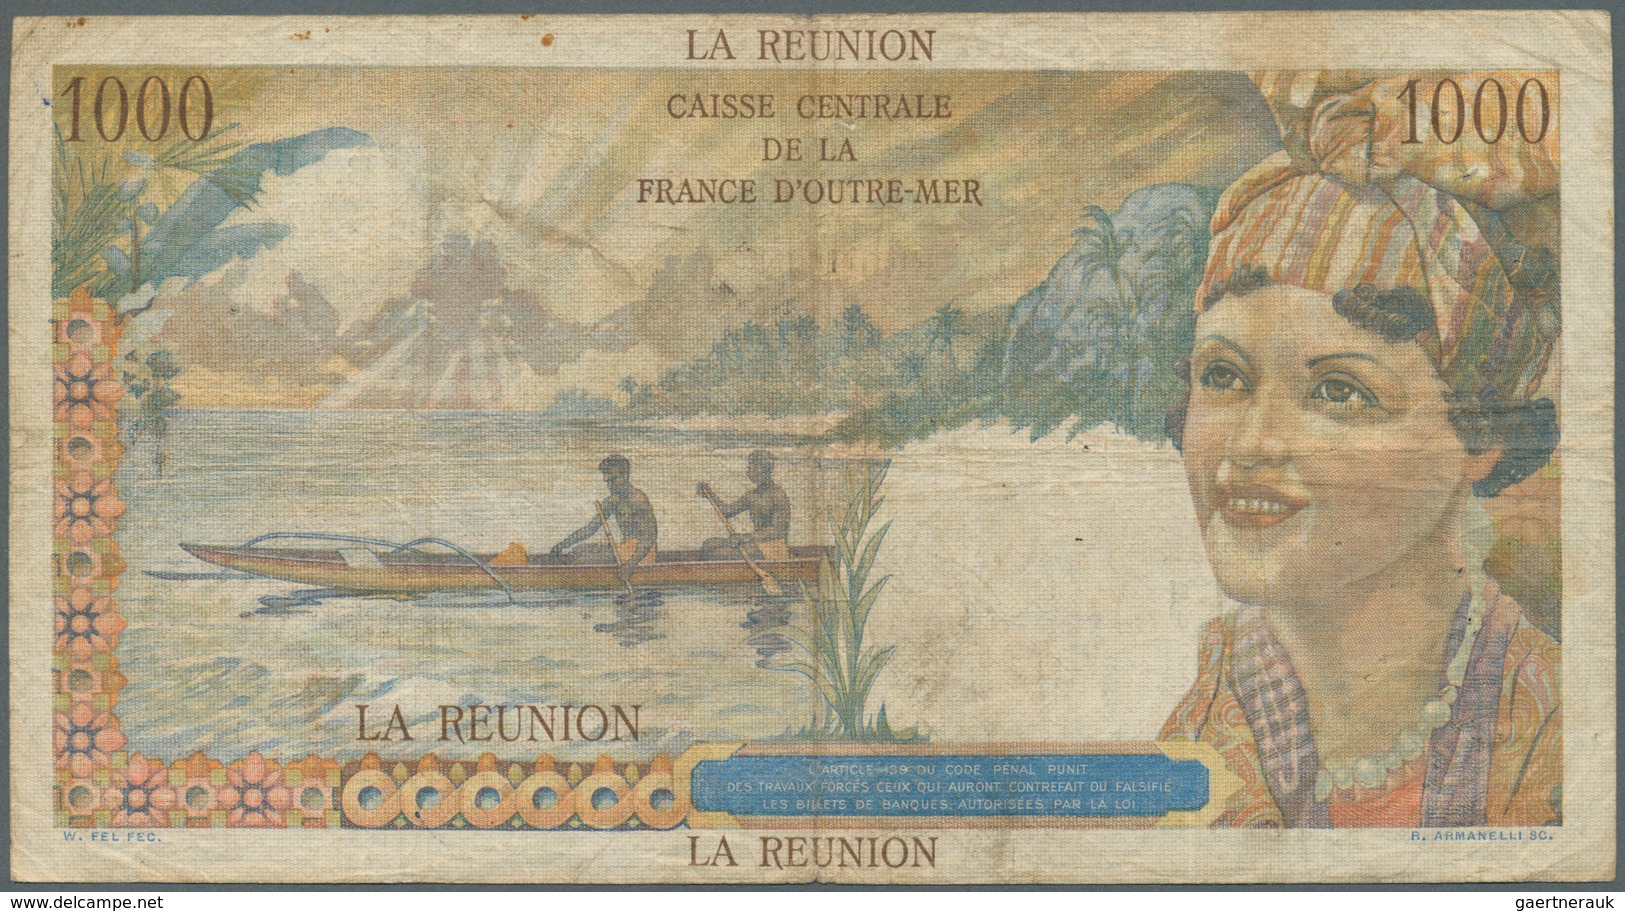 02249 Réunion: 1000 Francs ND(1947) P. 47, Used With Stronger Center Folds, Stained Paper, A Few Pinholes - Reunión